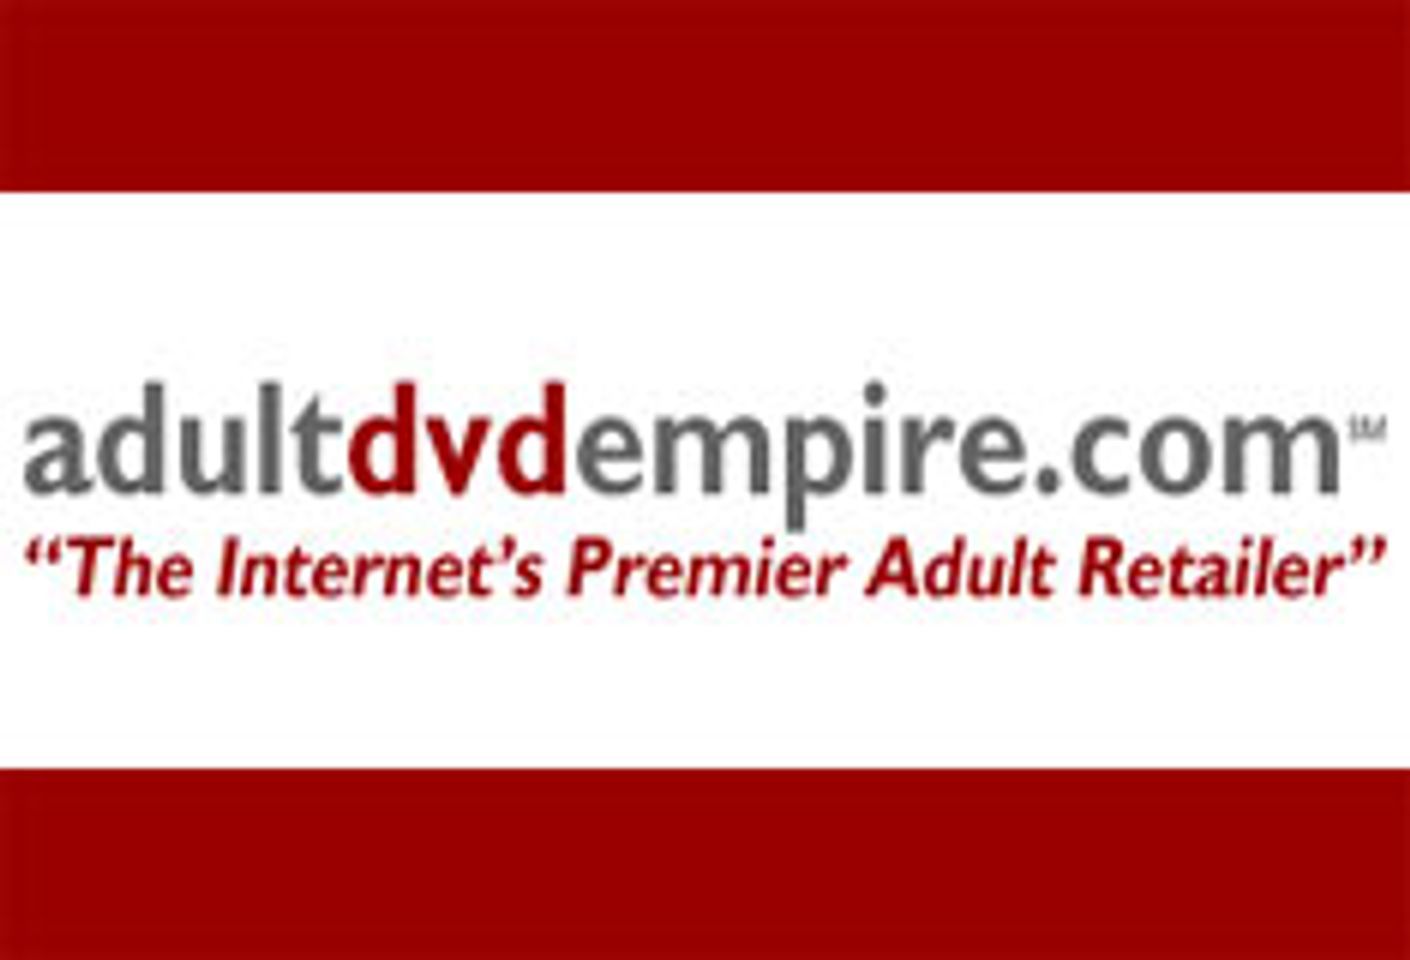 The Biggest Adult Releases of 2005 Come to Adult DVD Empire